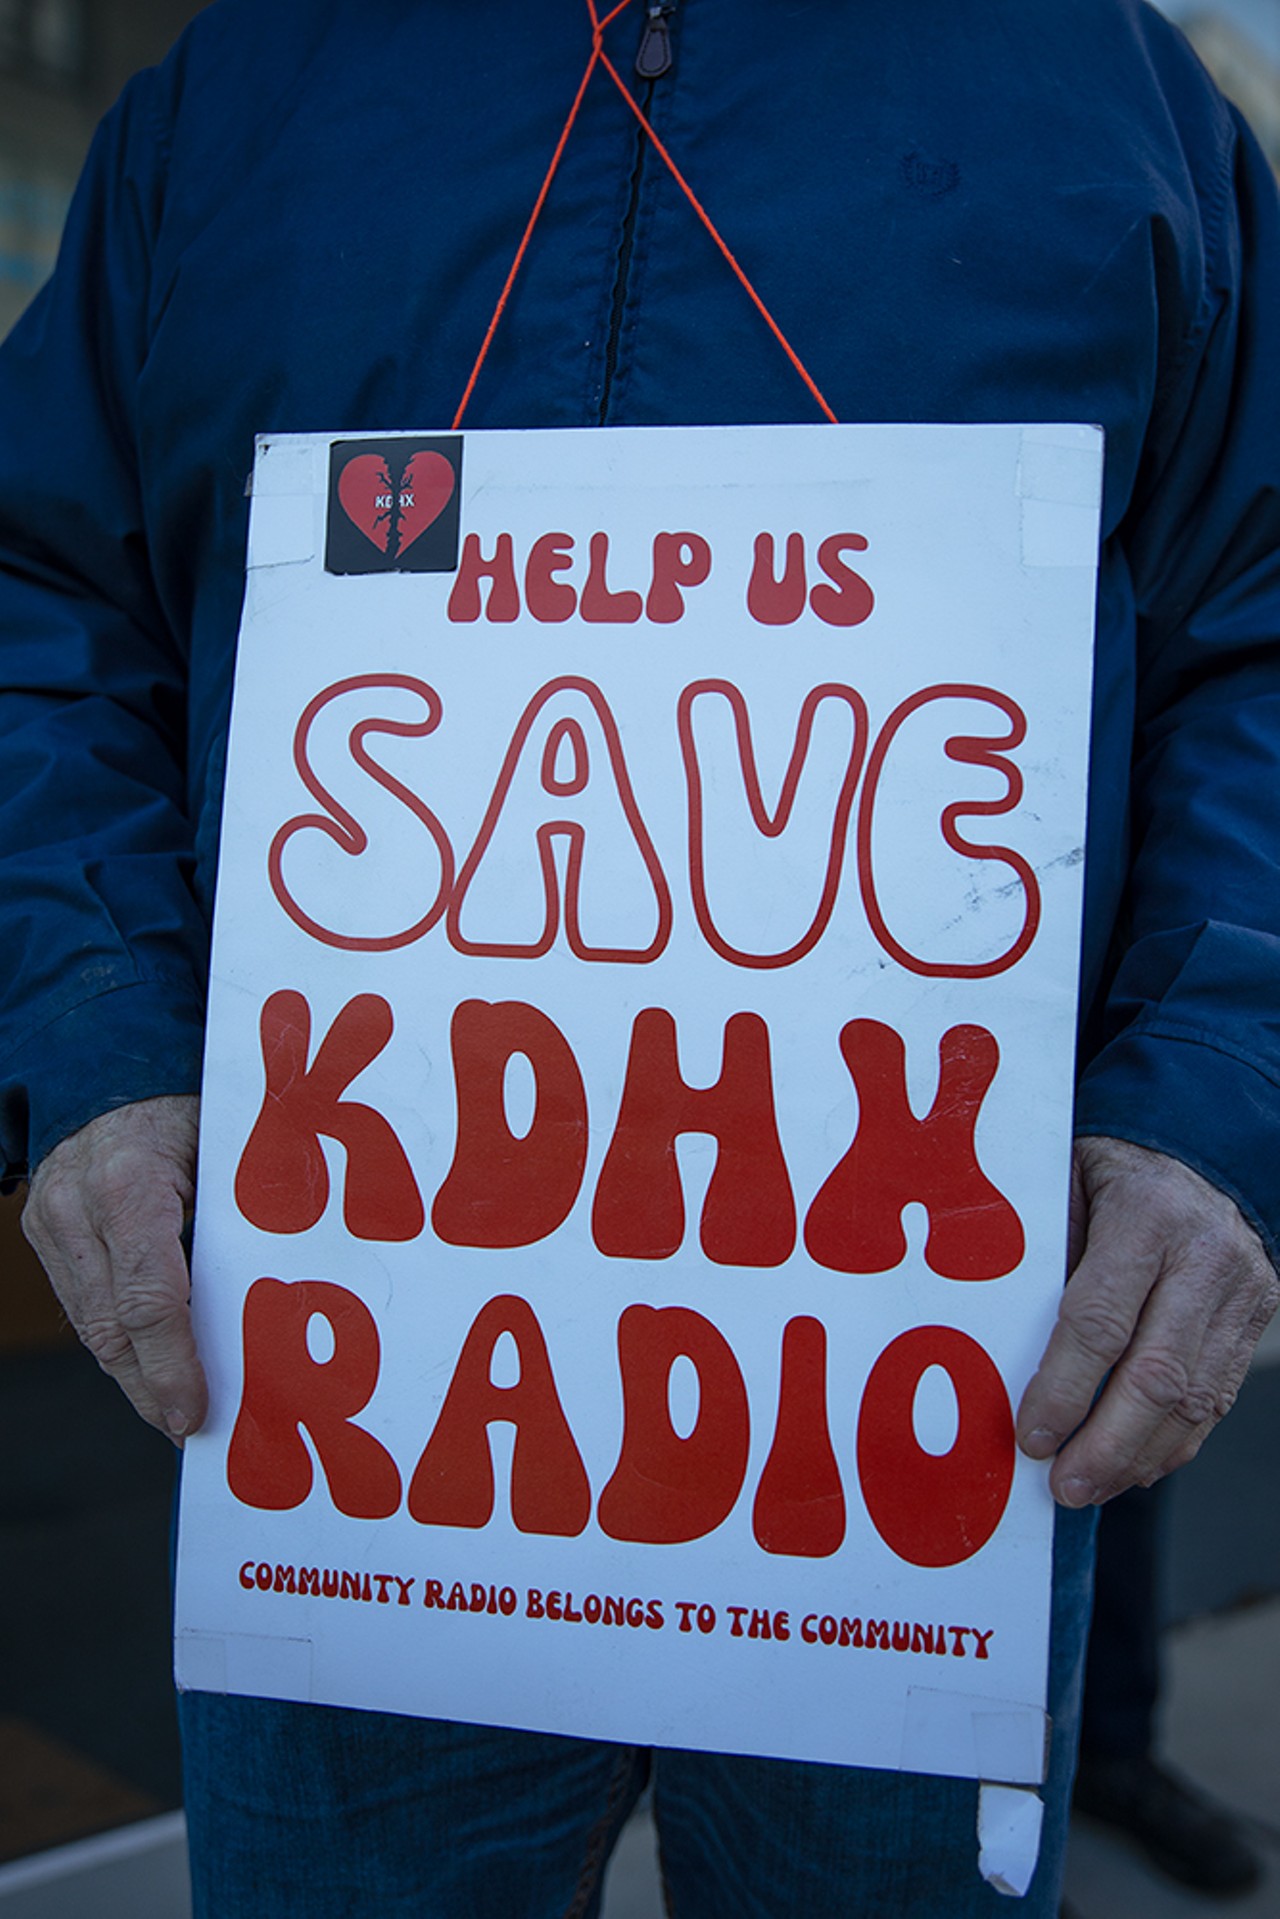 Protest Rally Targets KDHX Leadership at Its Doorstep